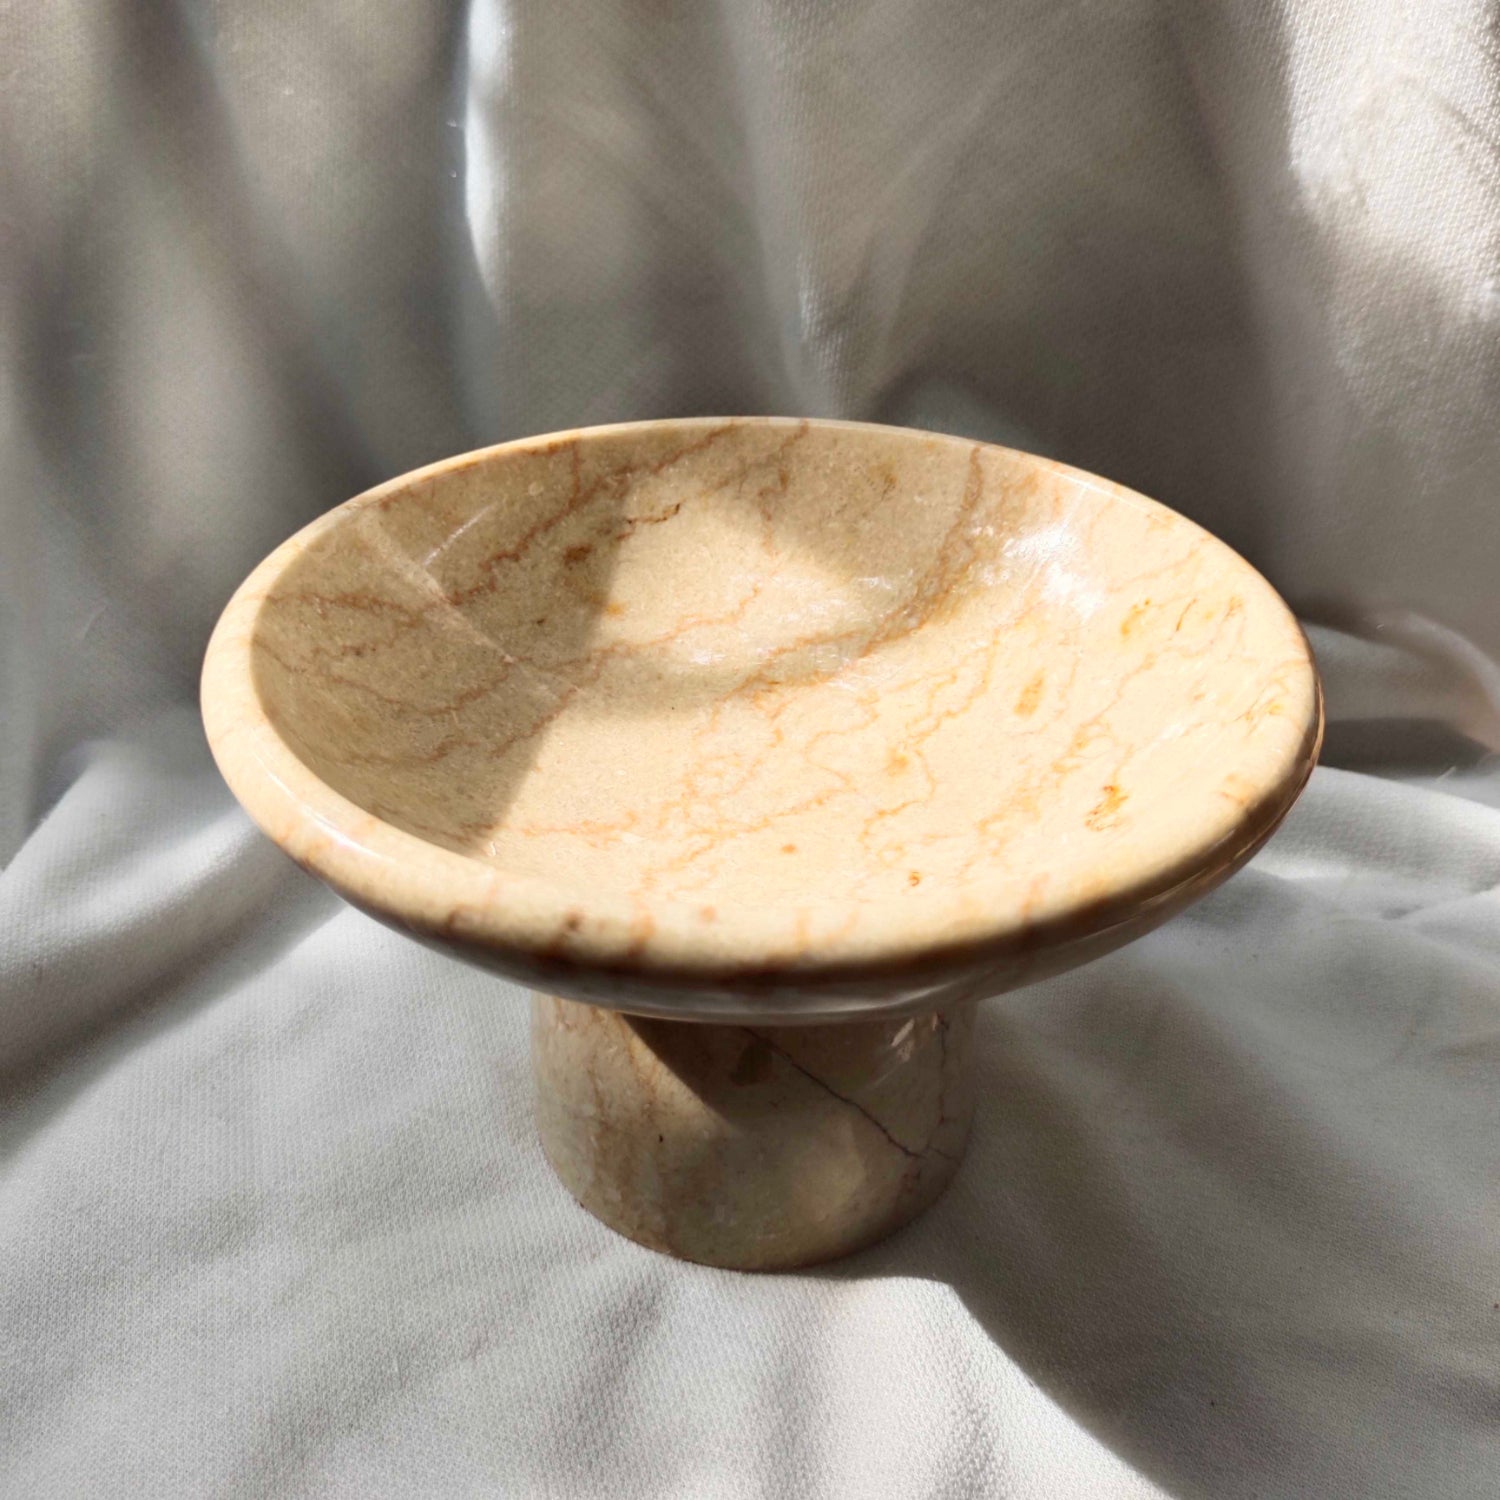 Beige Marble Stone Bowl Stand 18cm Dia